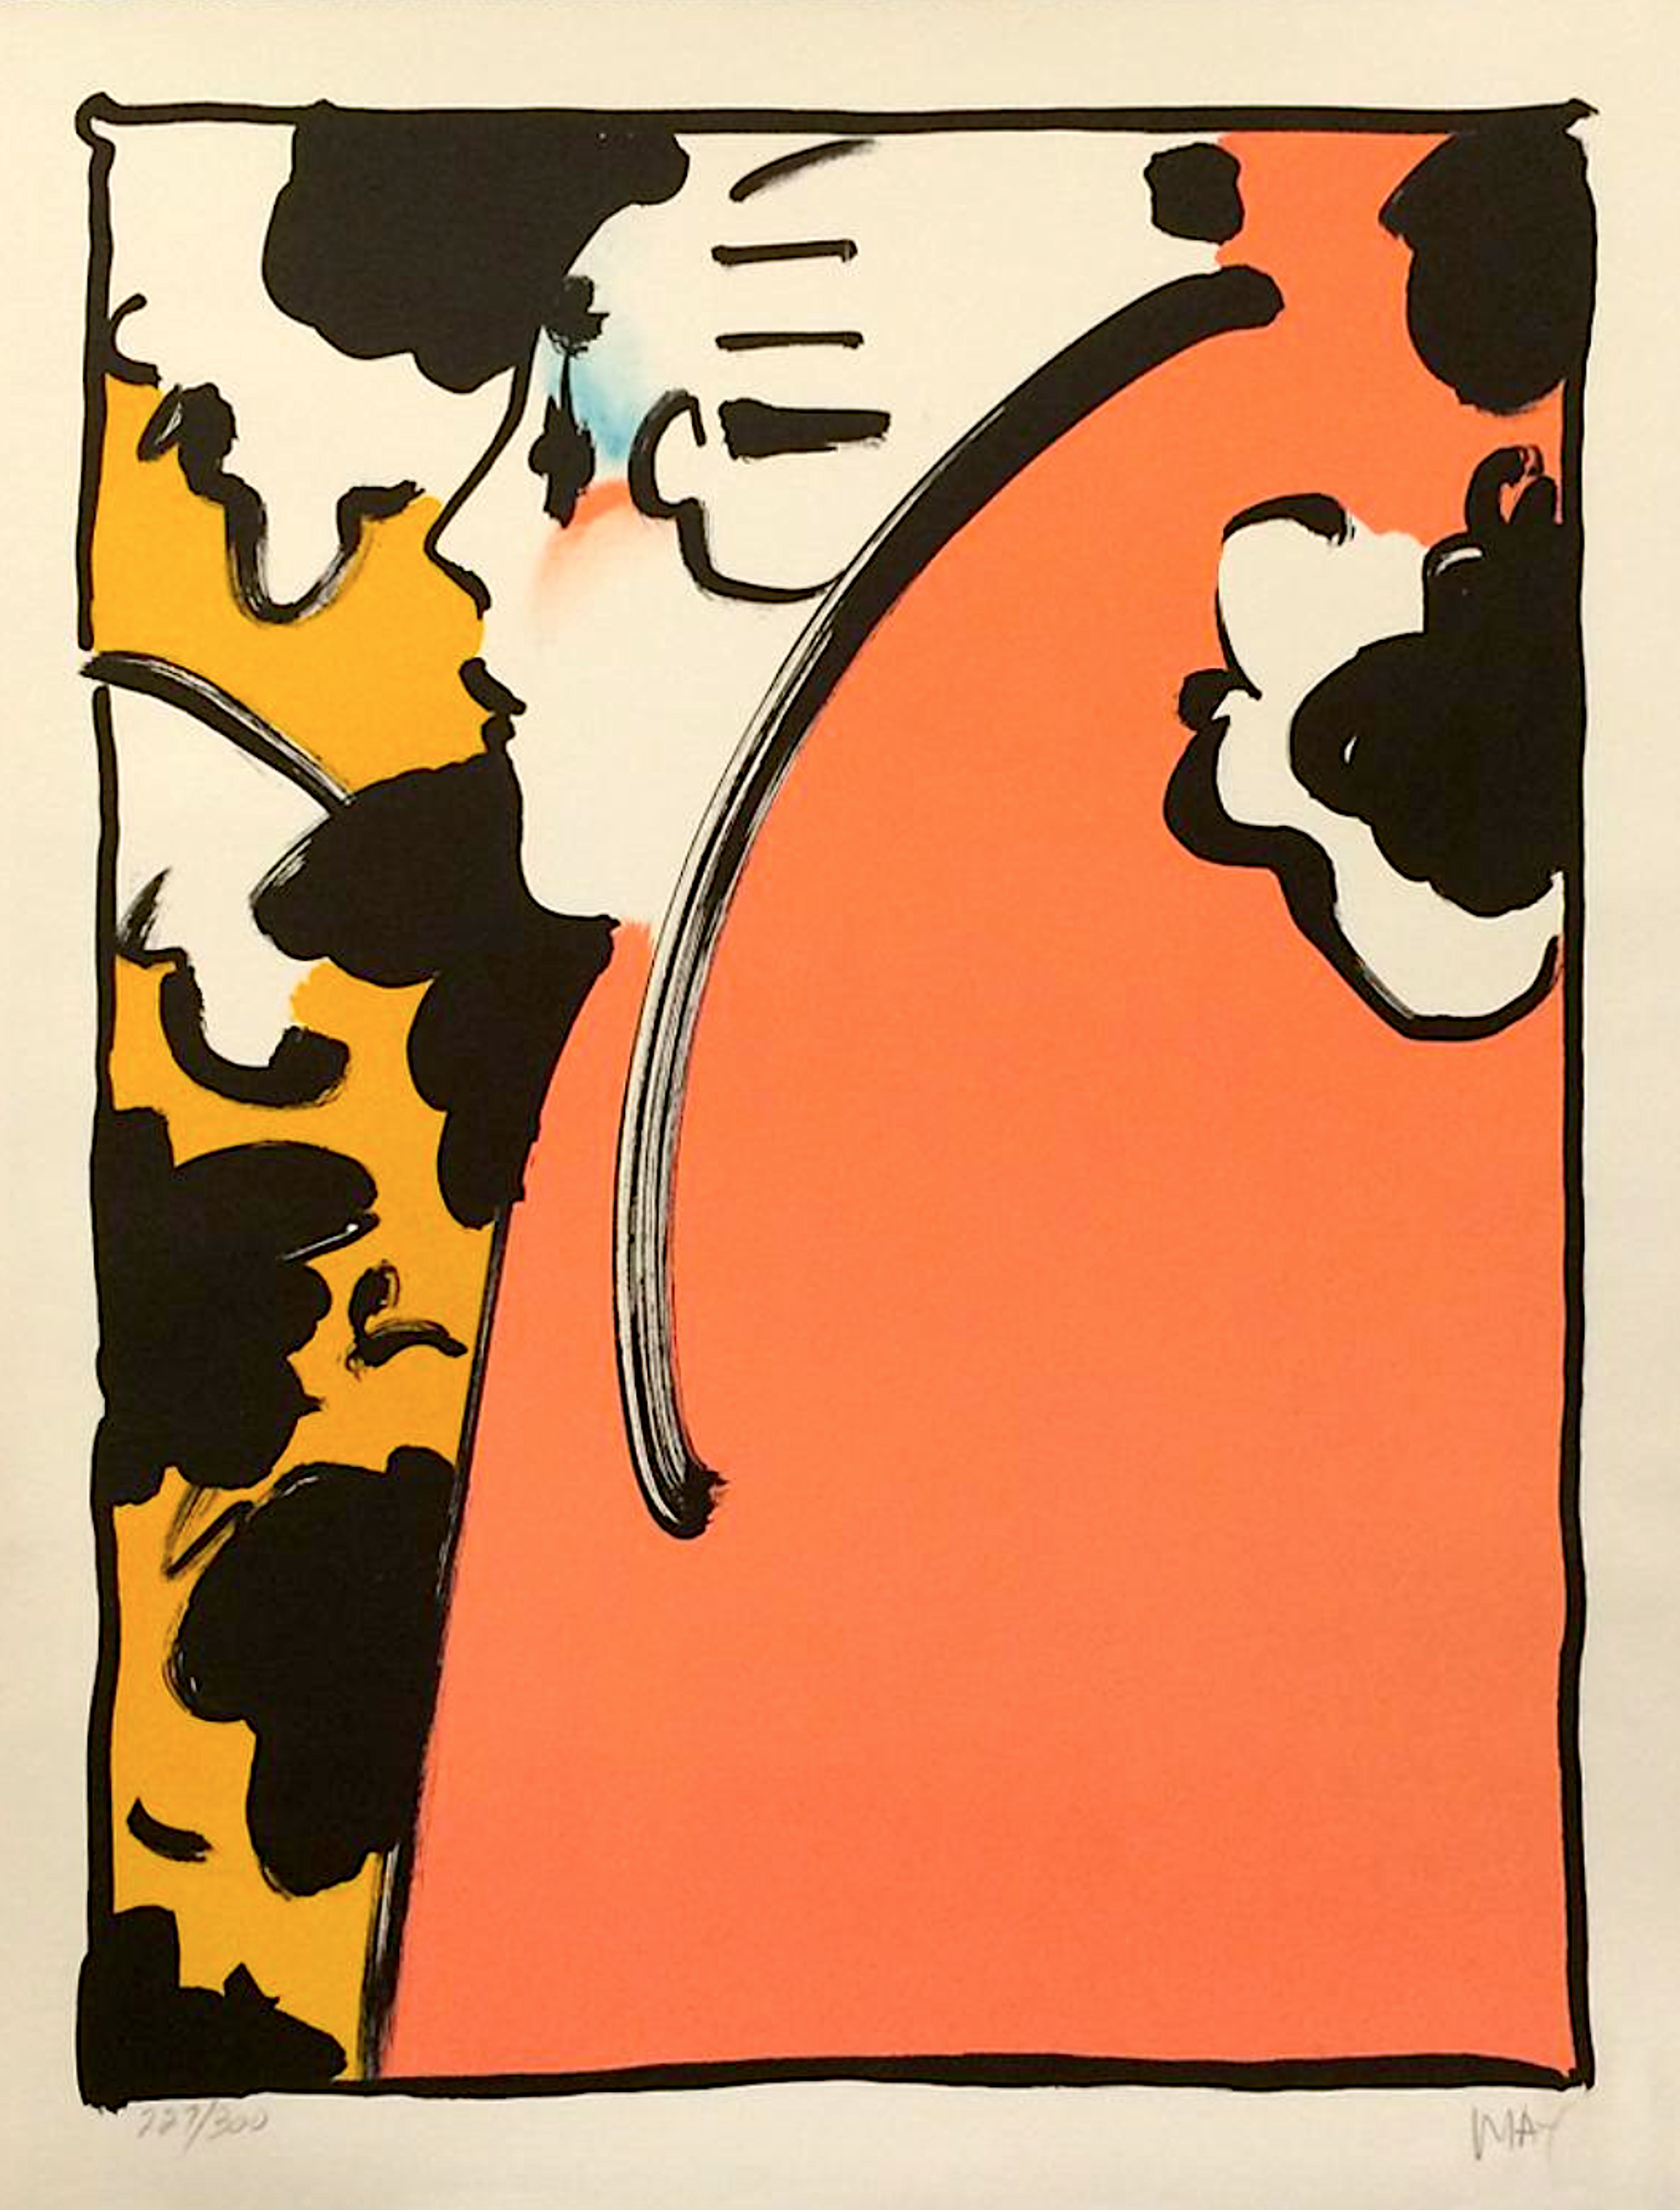 Peach Lady by Peter Max